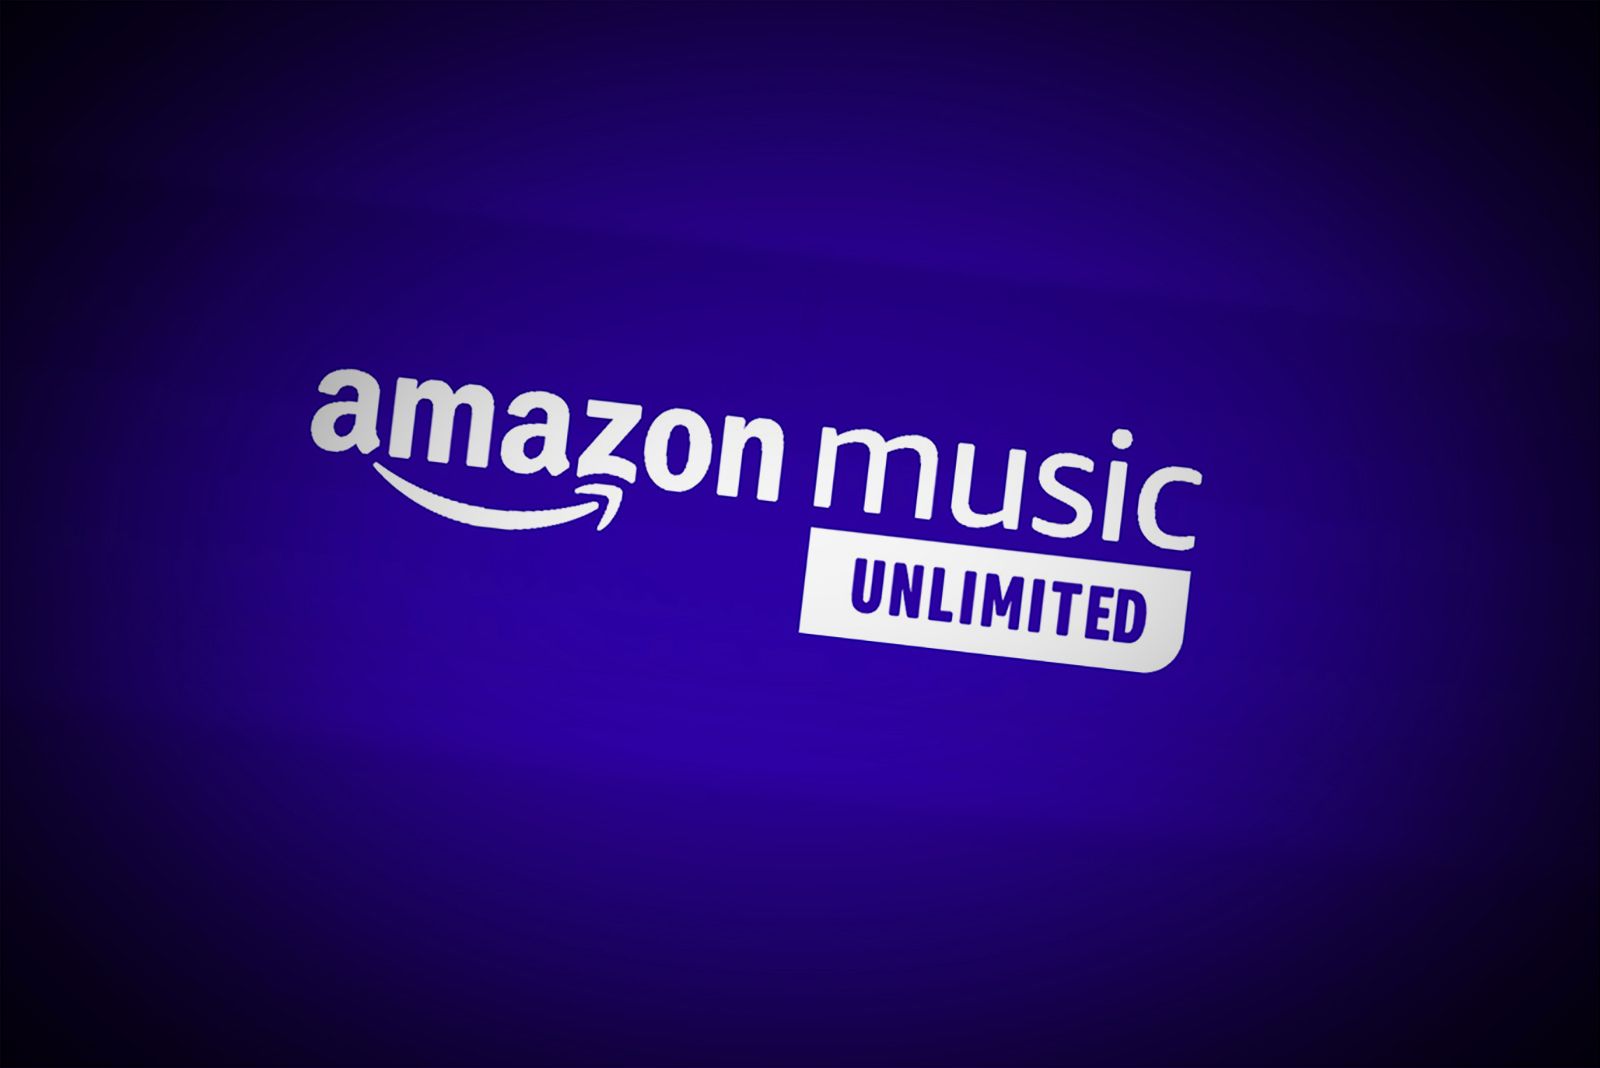 Amazon Music unlimited text in white on a blue background